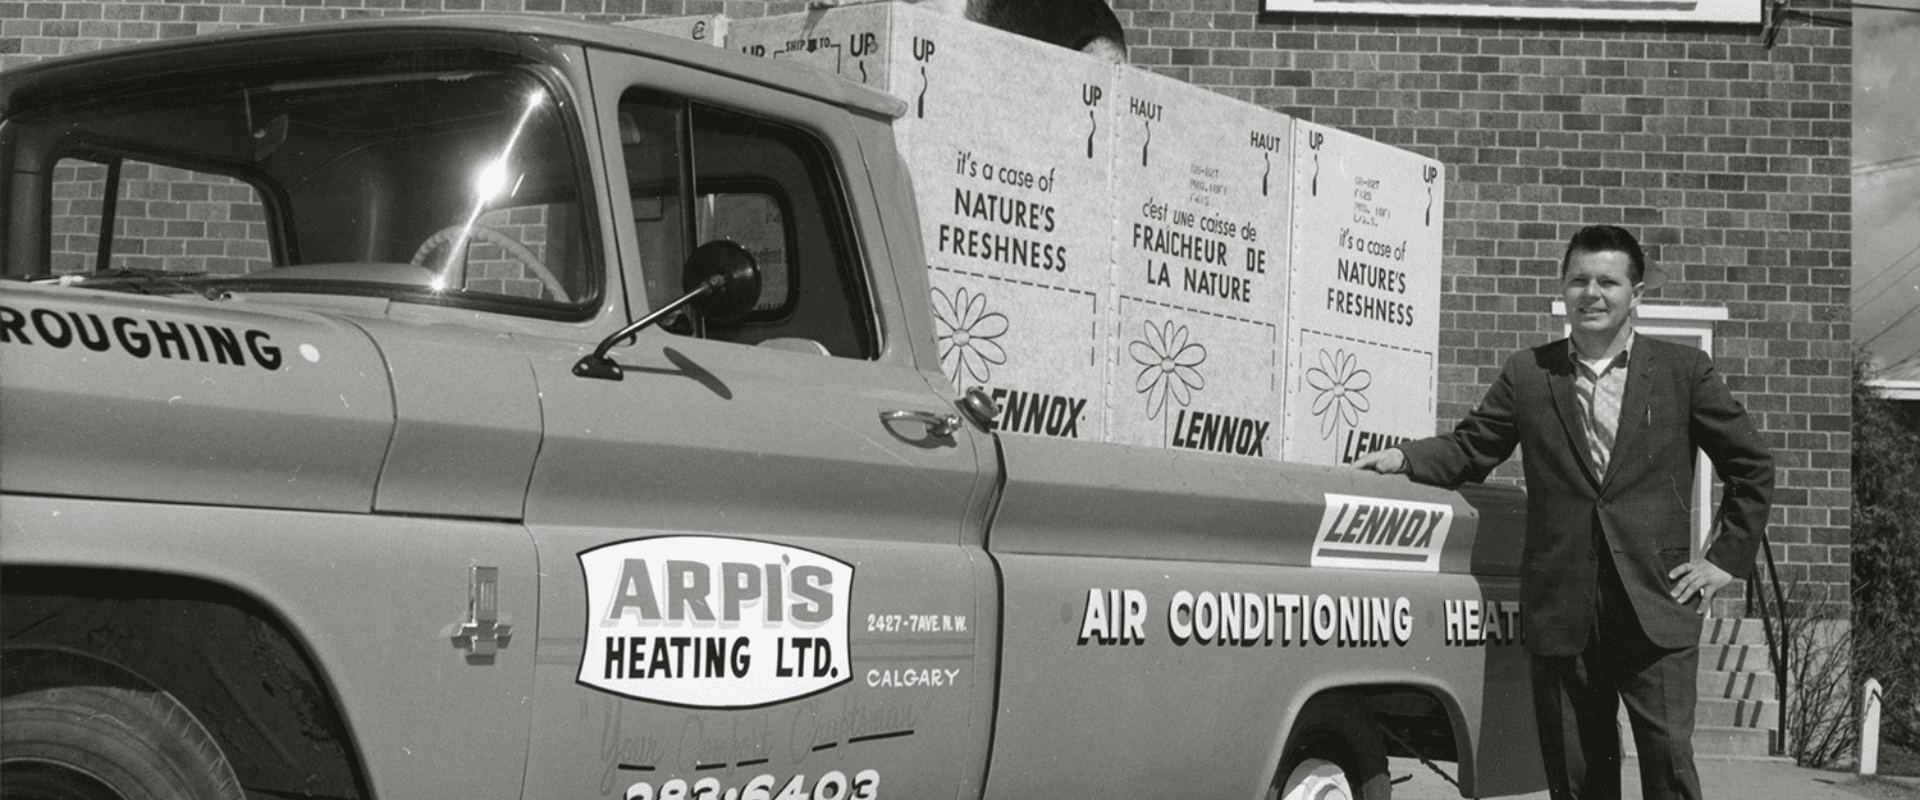 Arpi's has been providing Calgarians with HVAC service for over 55 years.